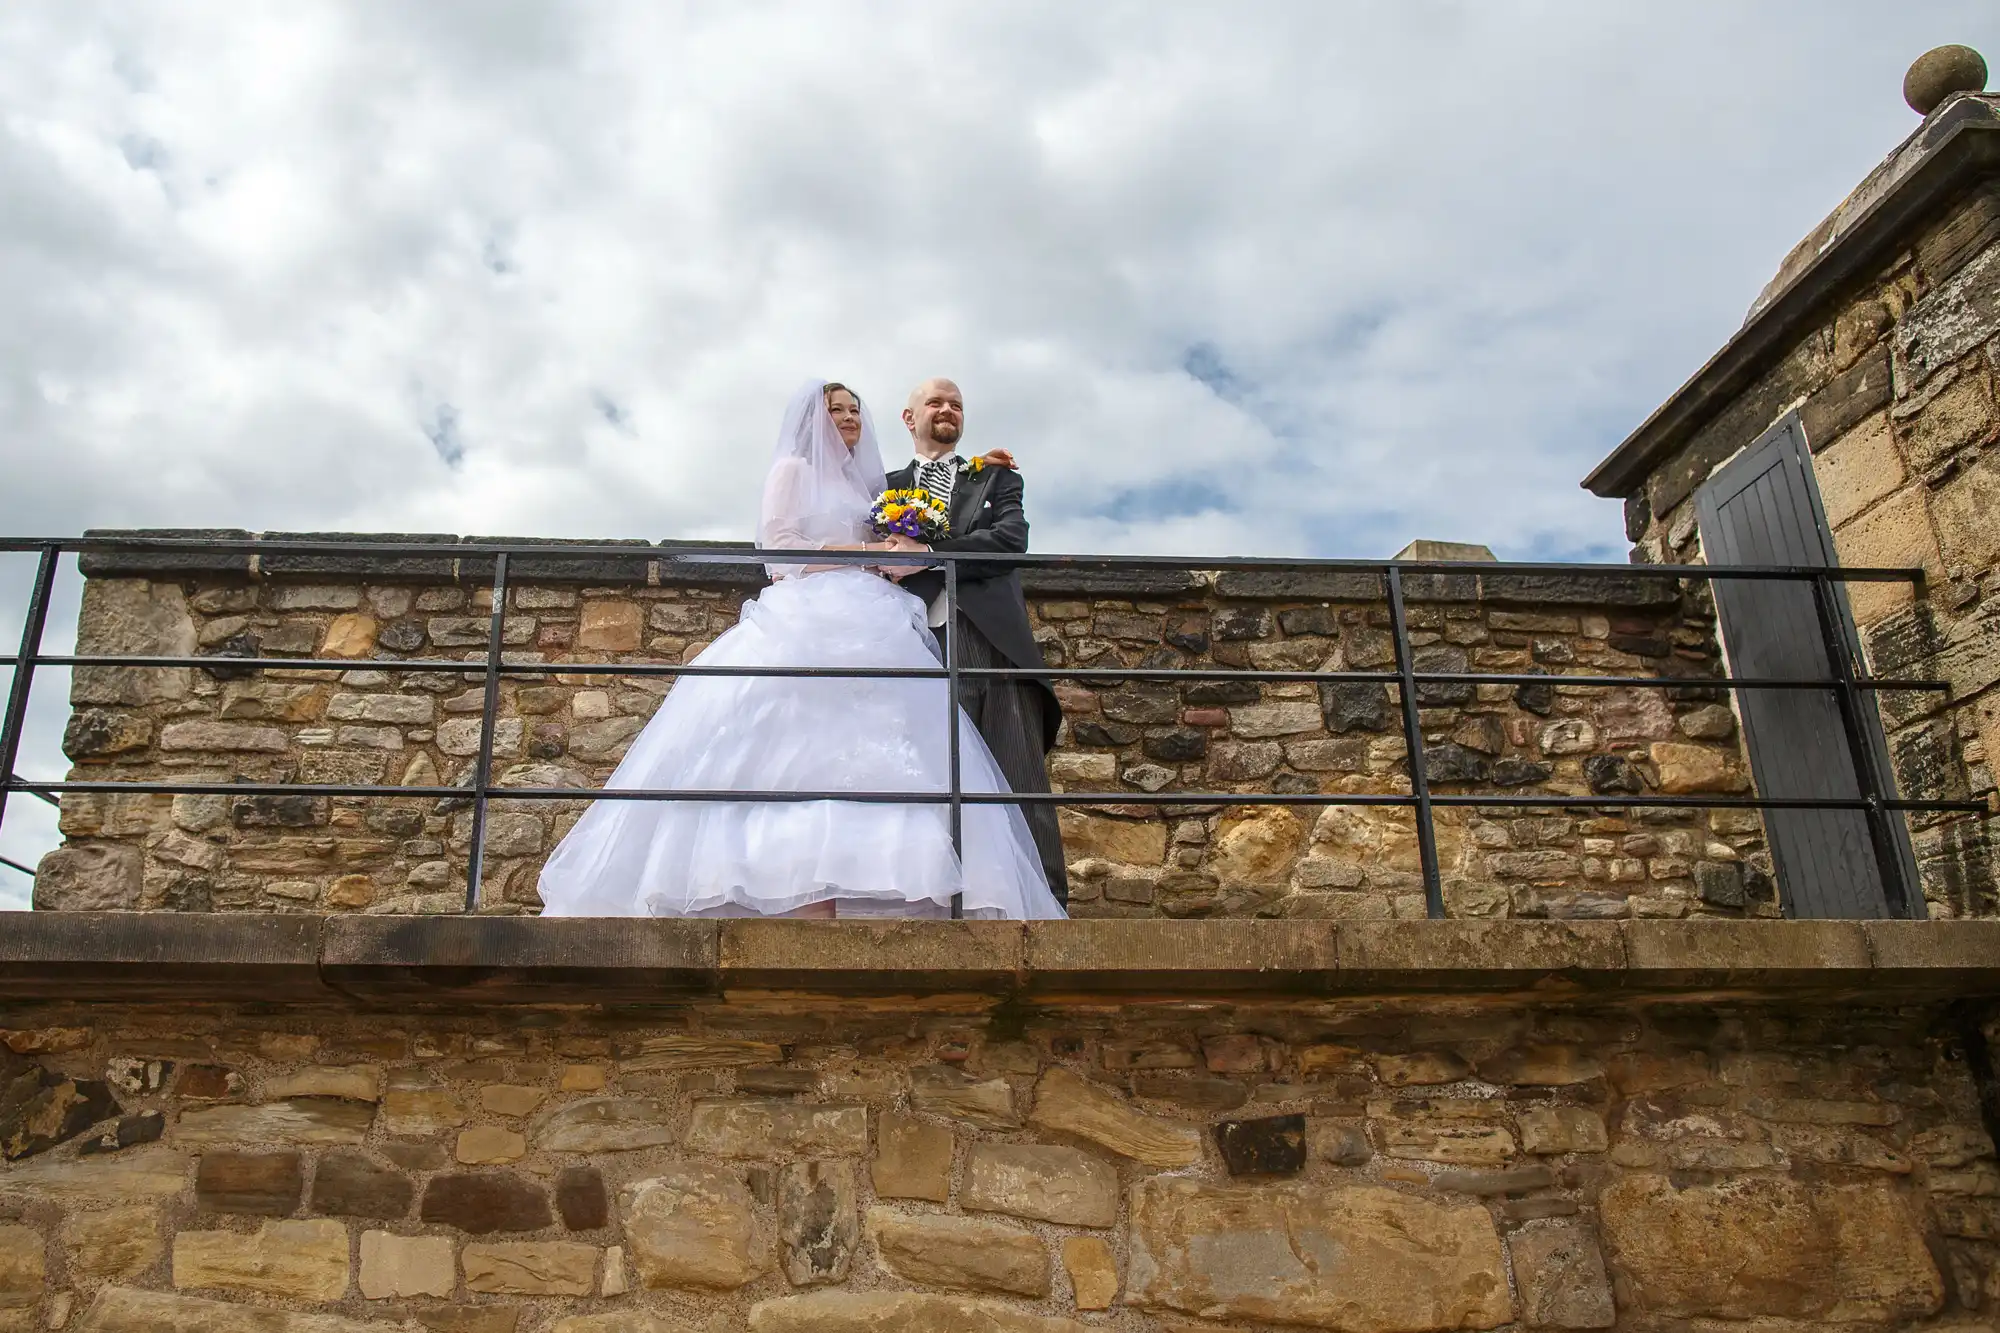 A bride in a white dress and a groom in a suit holding a bouquet stand together on a stone wall under a cloudy sky.